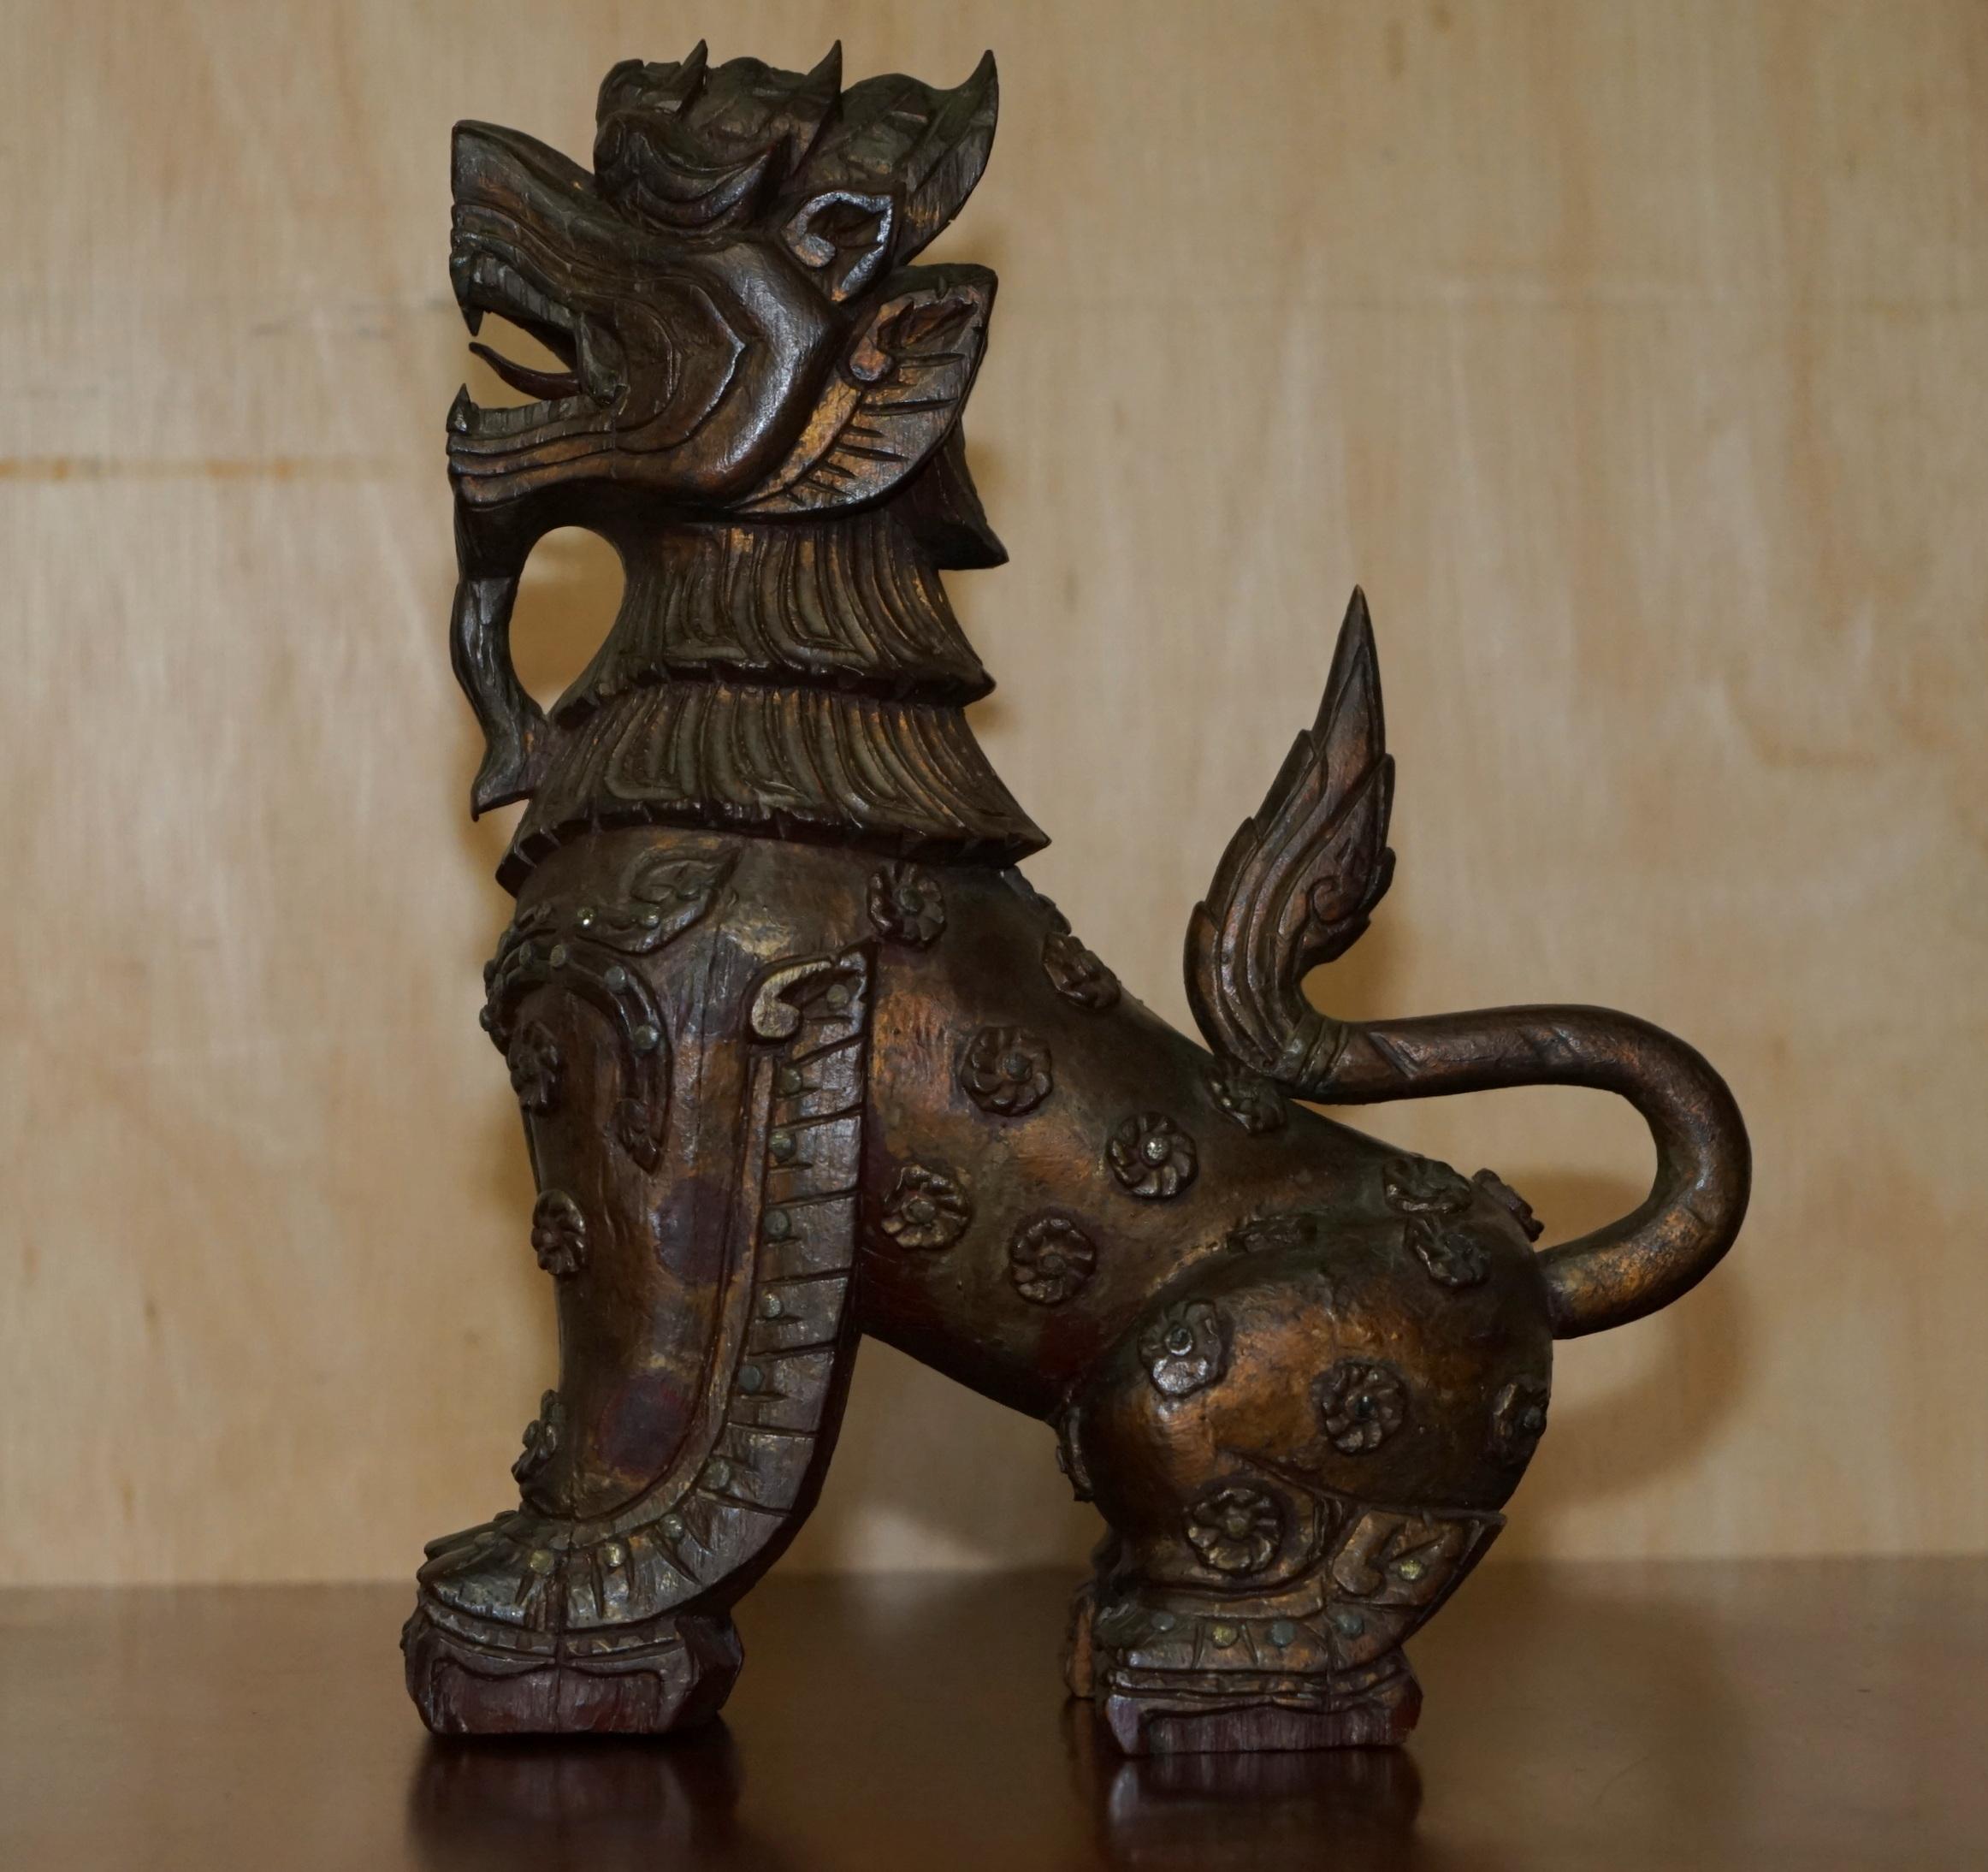 Royal House Antiques

Royal House Antiques is delighted to offer for sale this lovely, vintage hand carved Chinese Foo Lion Dog statue with original paint and patina

This is a very special and highly decorative piece, it really does give you a